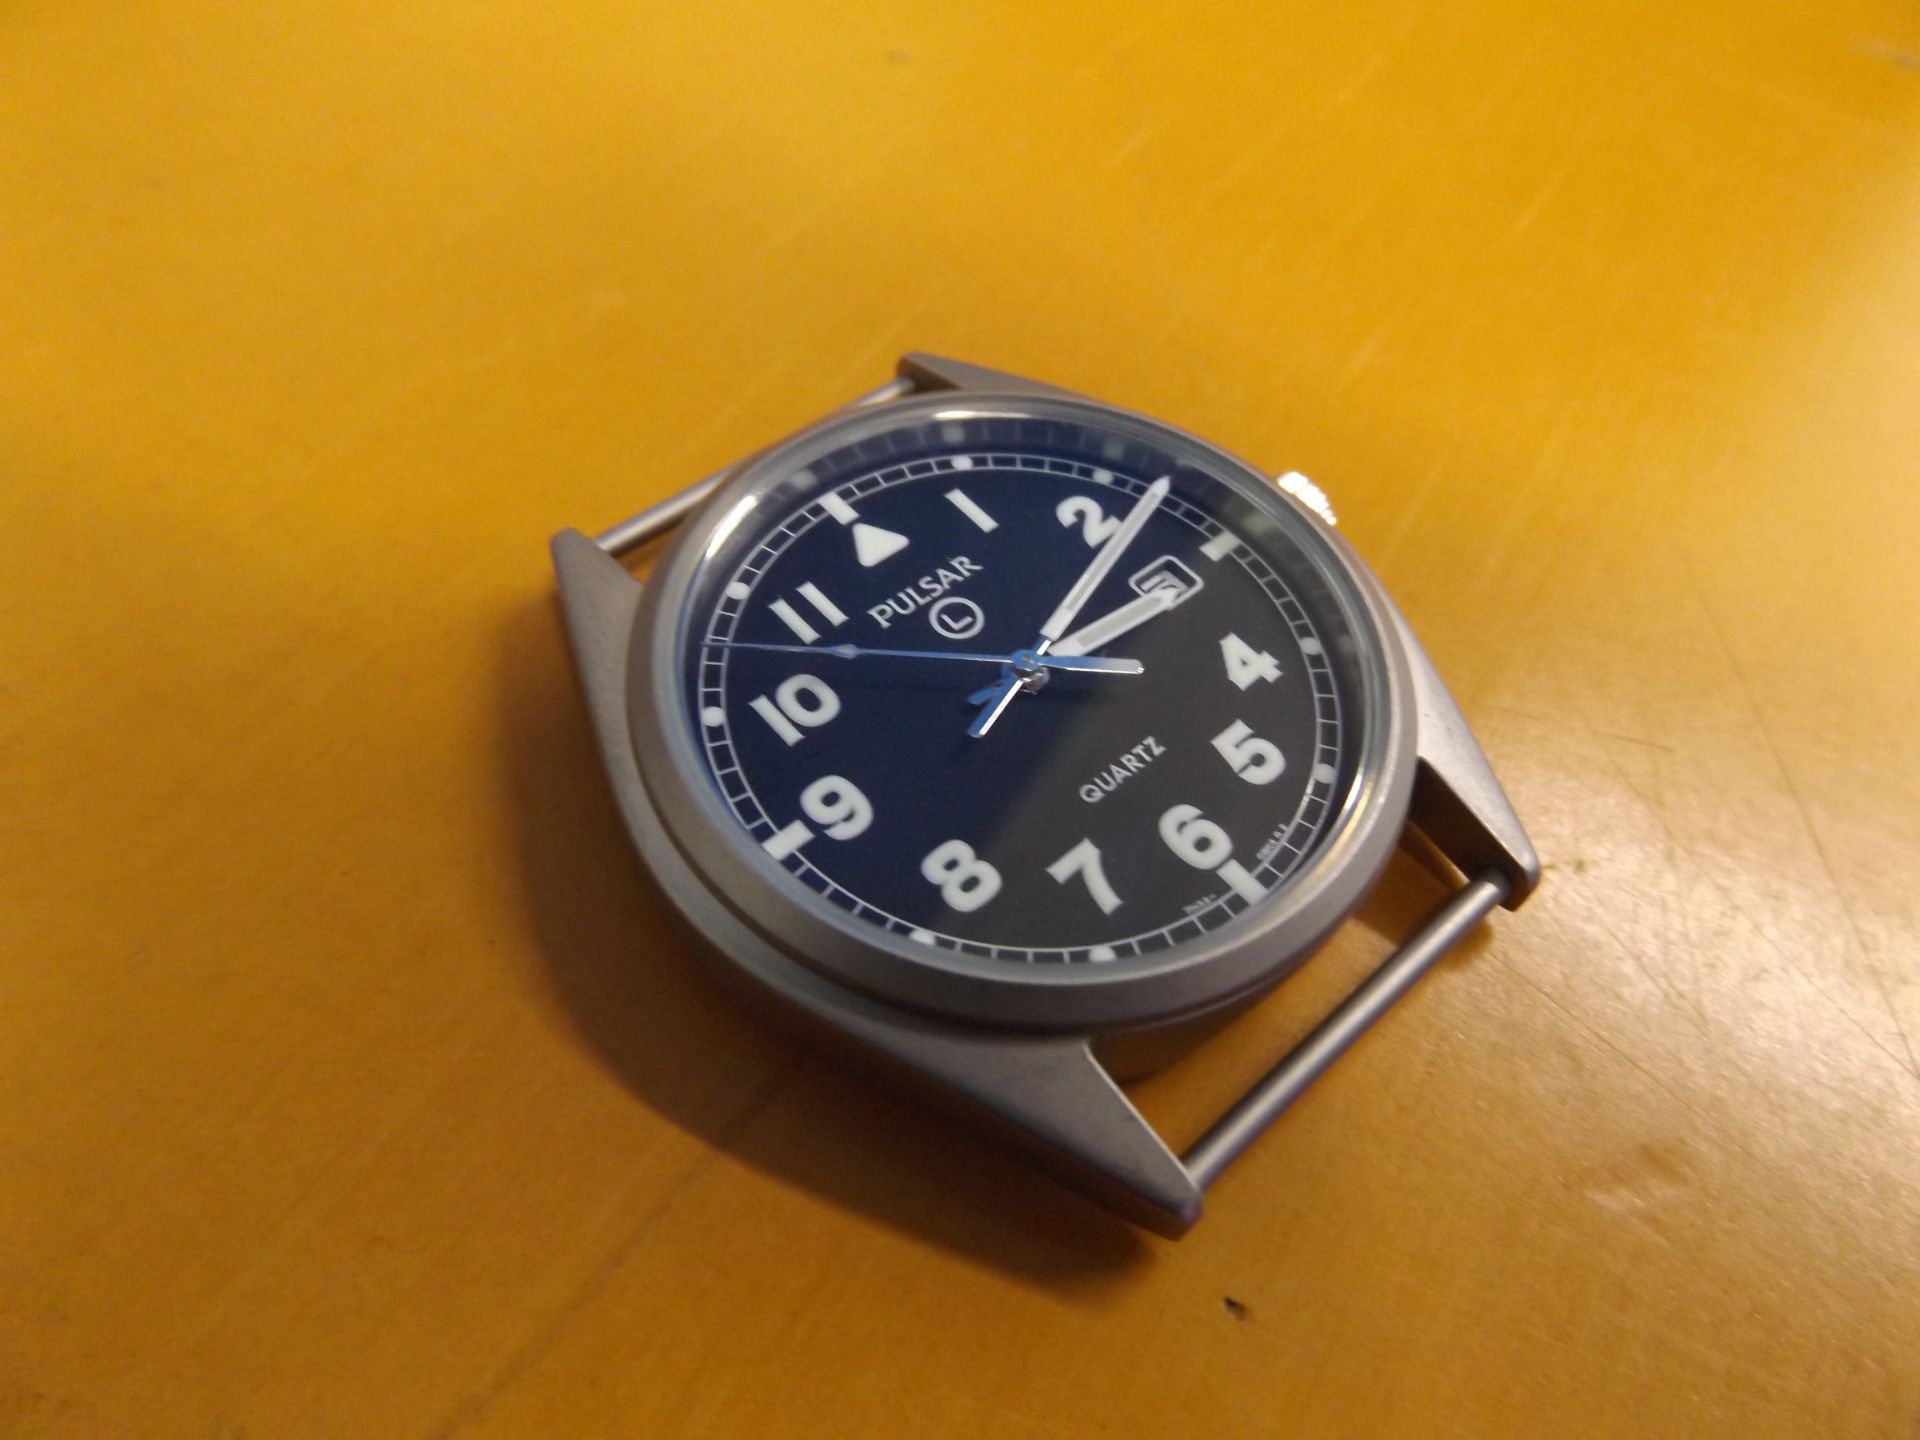 Unissued Pulsar G10 wrist watch - Afghan Issue - Image 4 of 7